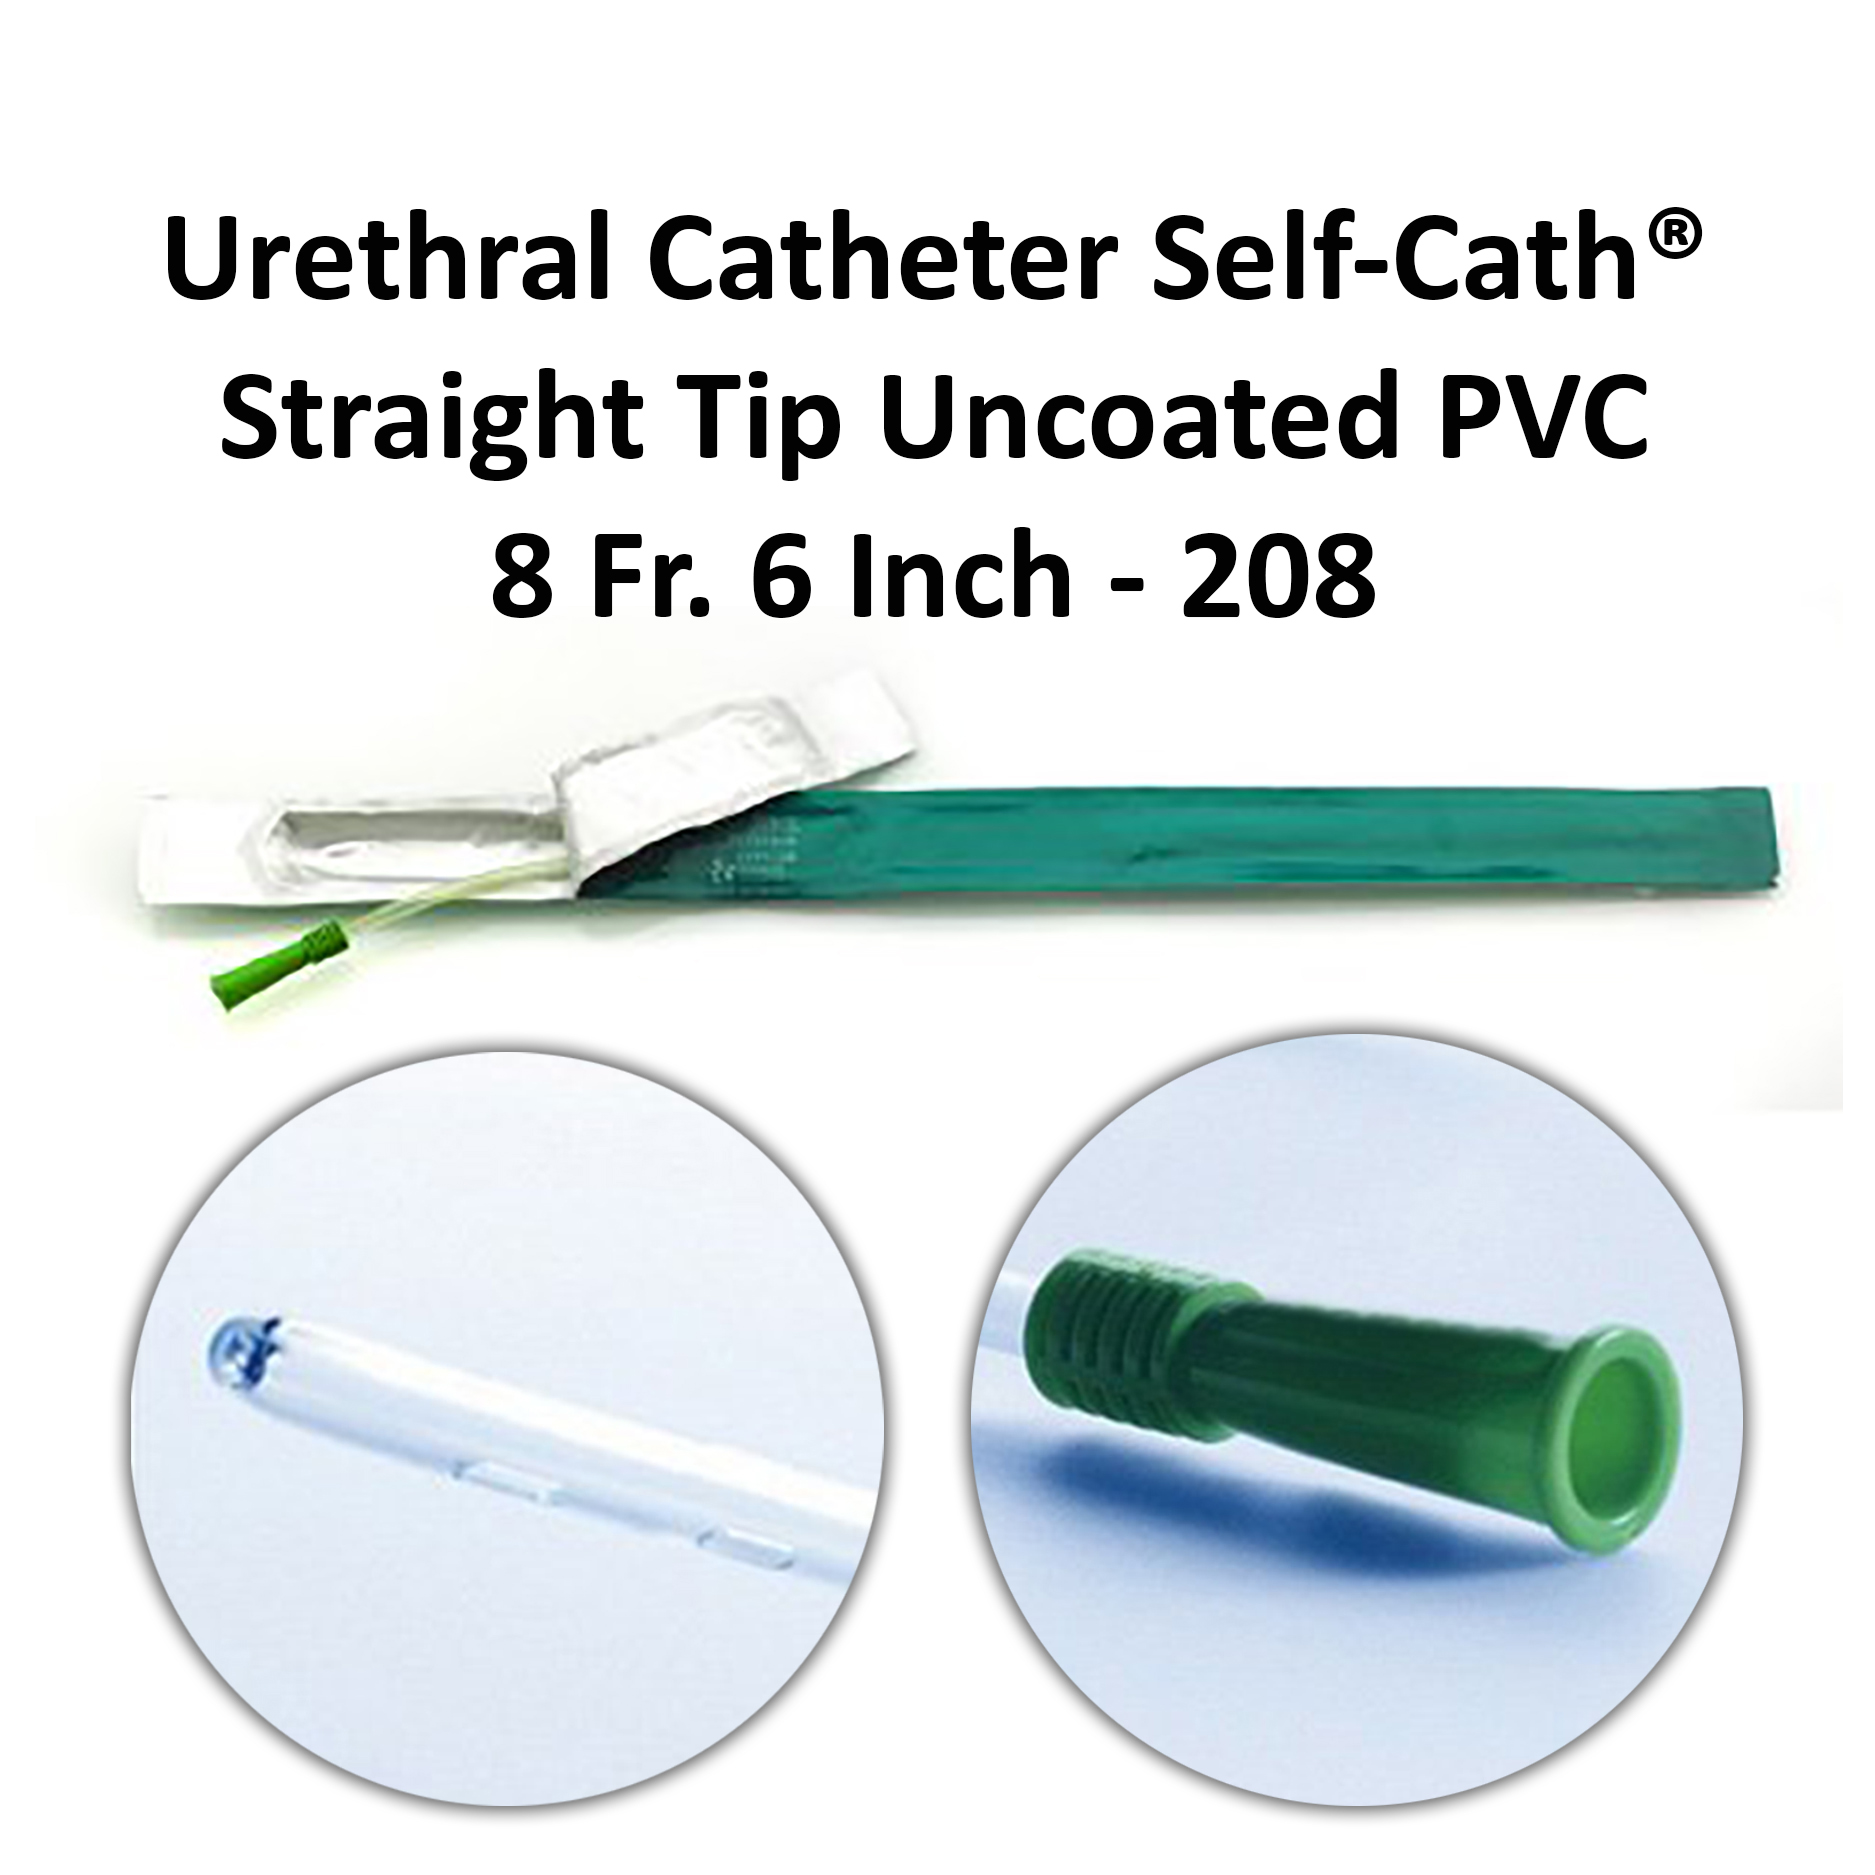 Urethral Catheter Self-Cath® Straight Tip Uncoated PVC 8 Fr. 6 Inch - 208 Michigan | USA